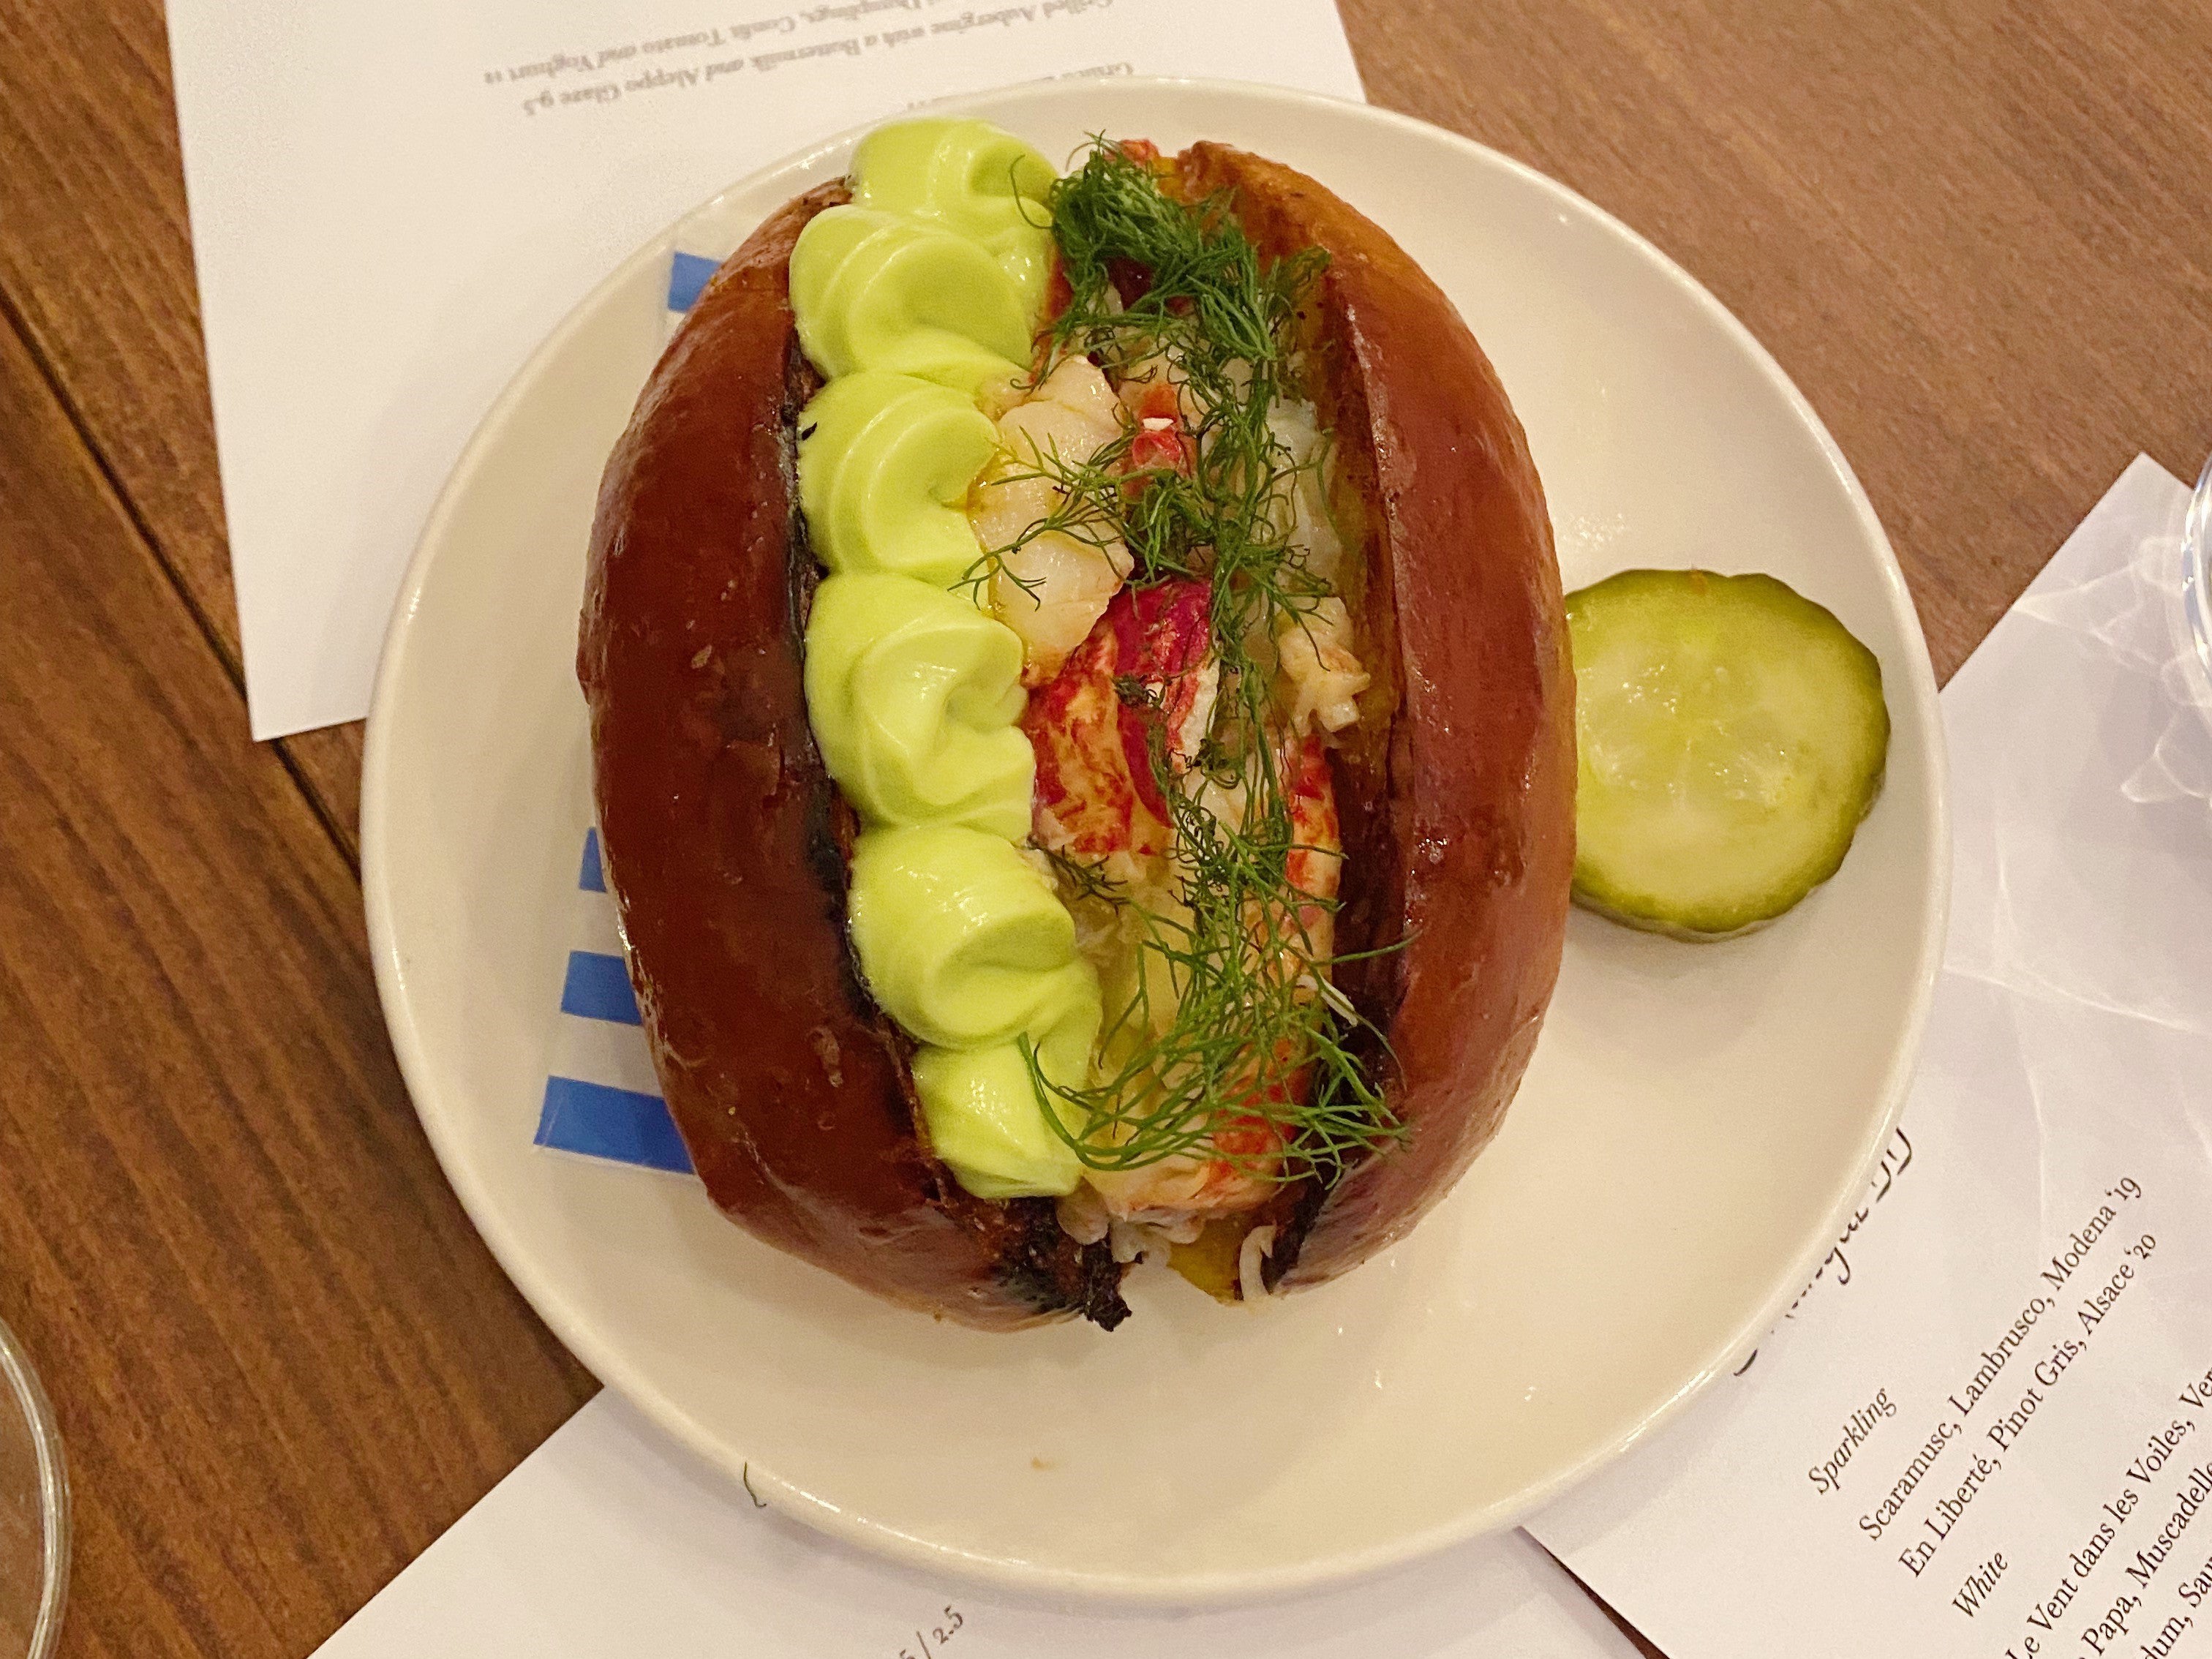 The brioche roll was so good, the lobster roll could have been enjoyed without the seafood